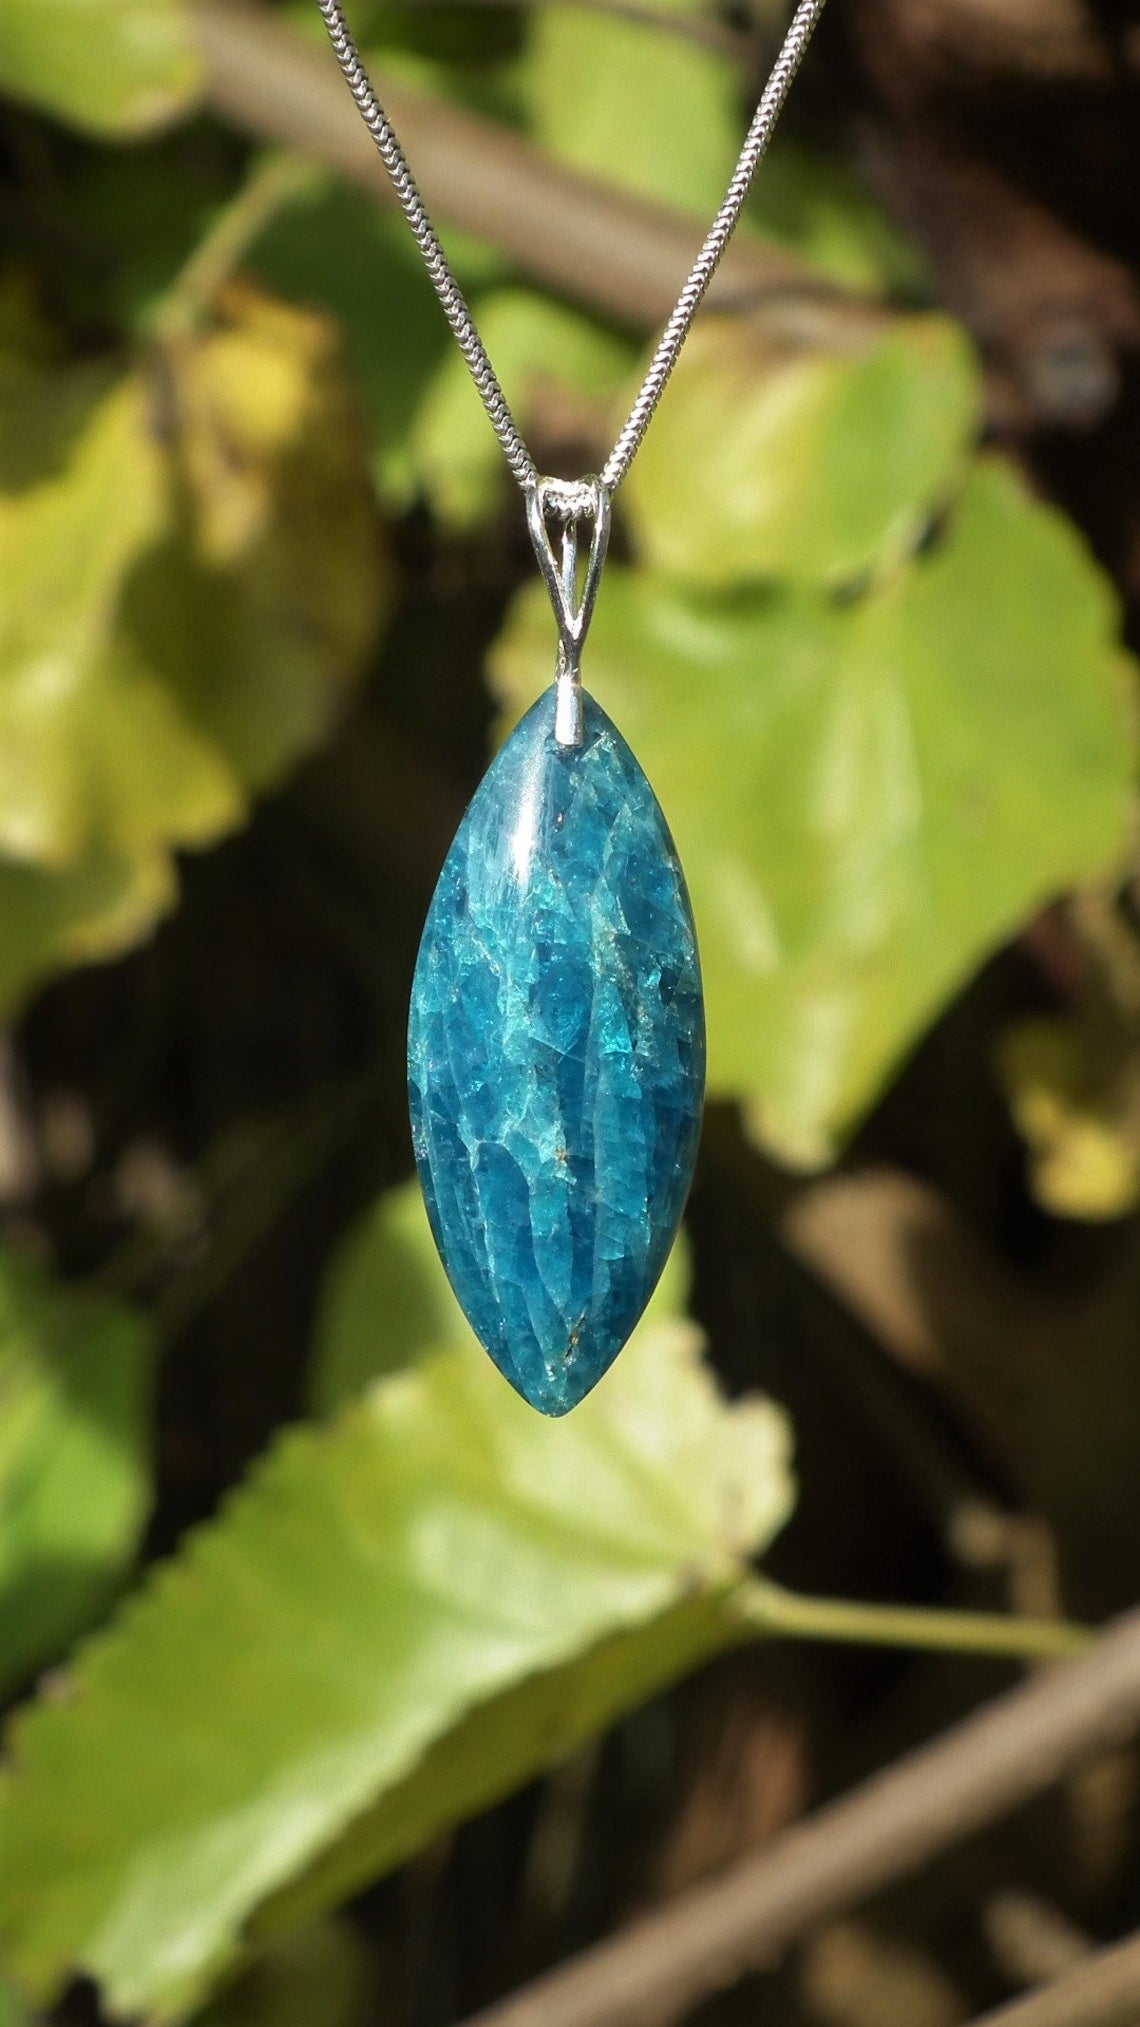 Blue apatite pendant with sterling silver bail